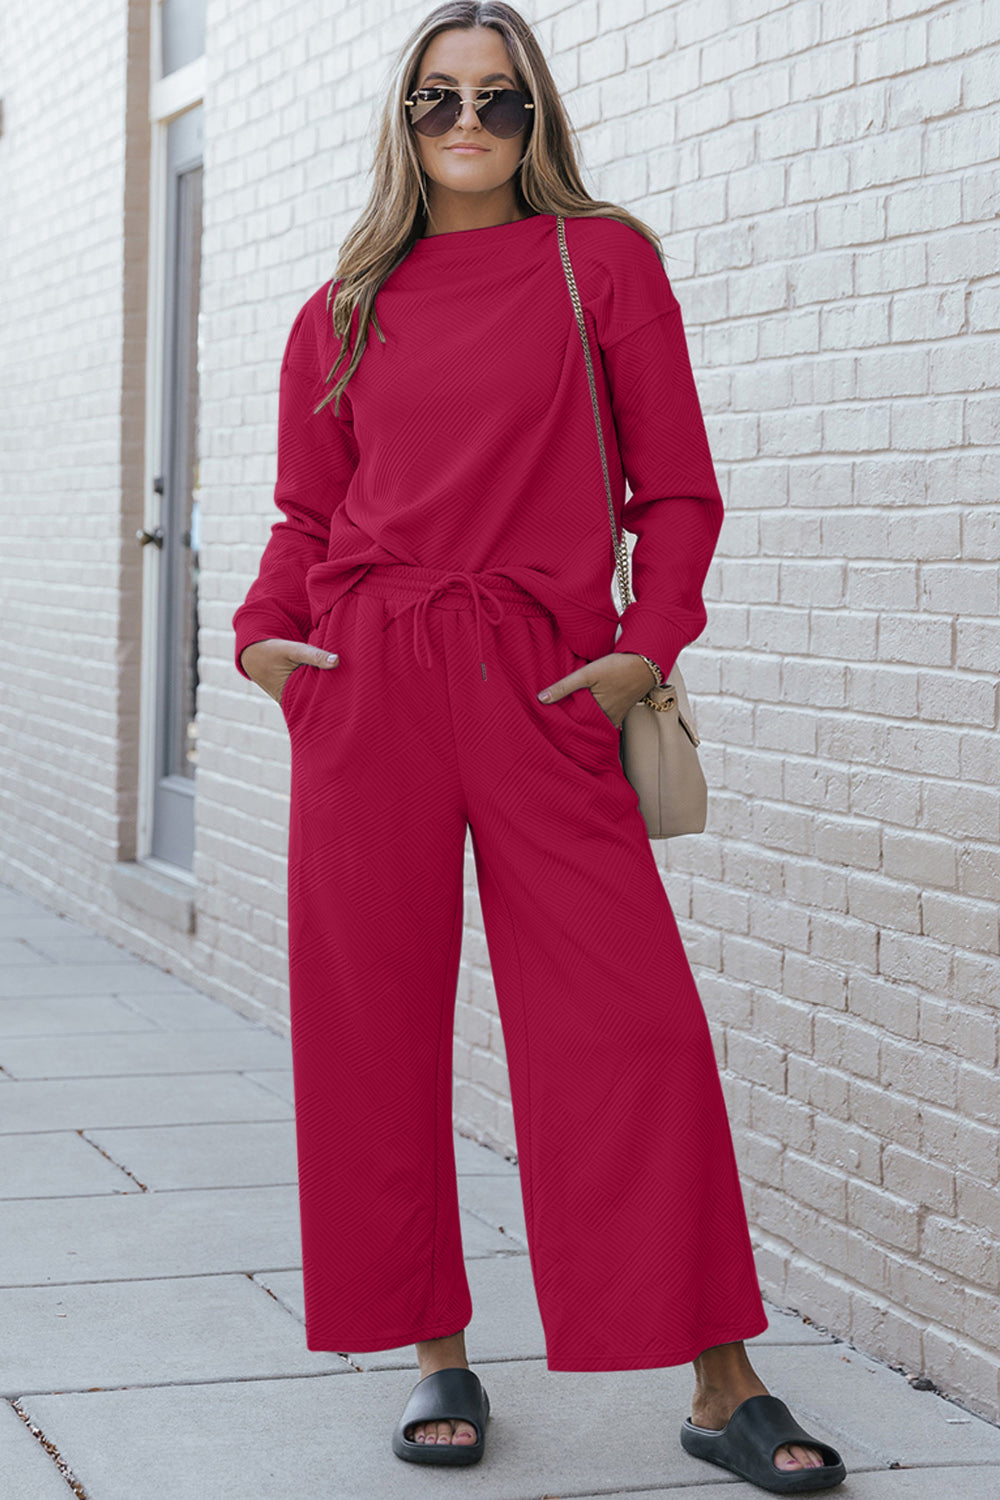 Double Take Full Size Textured Long Sleeve Top and Drawstring Pants Set Cerise S 